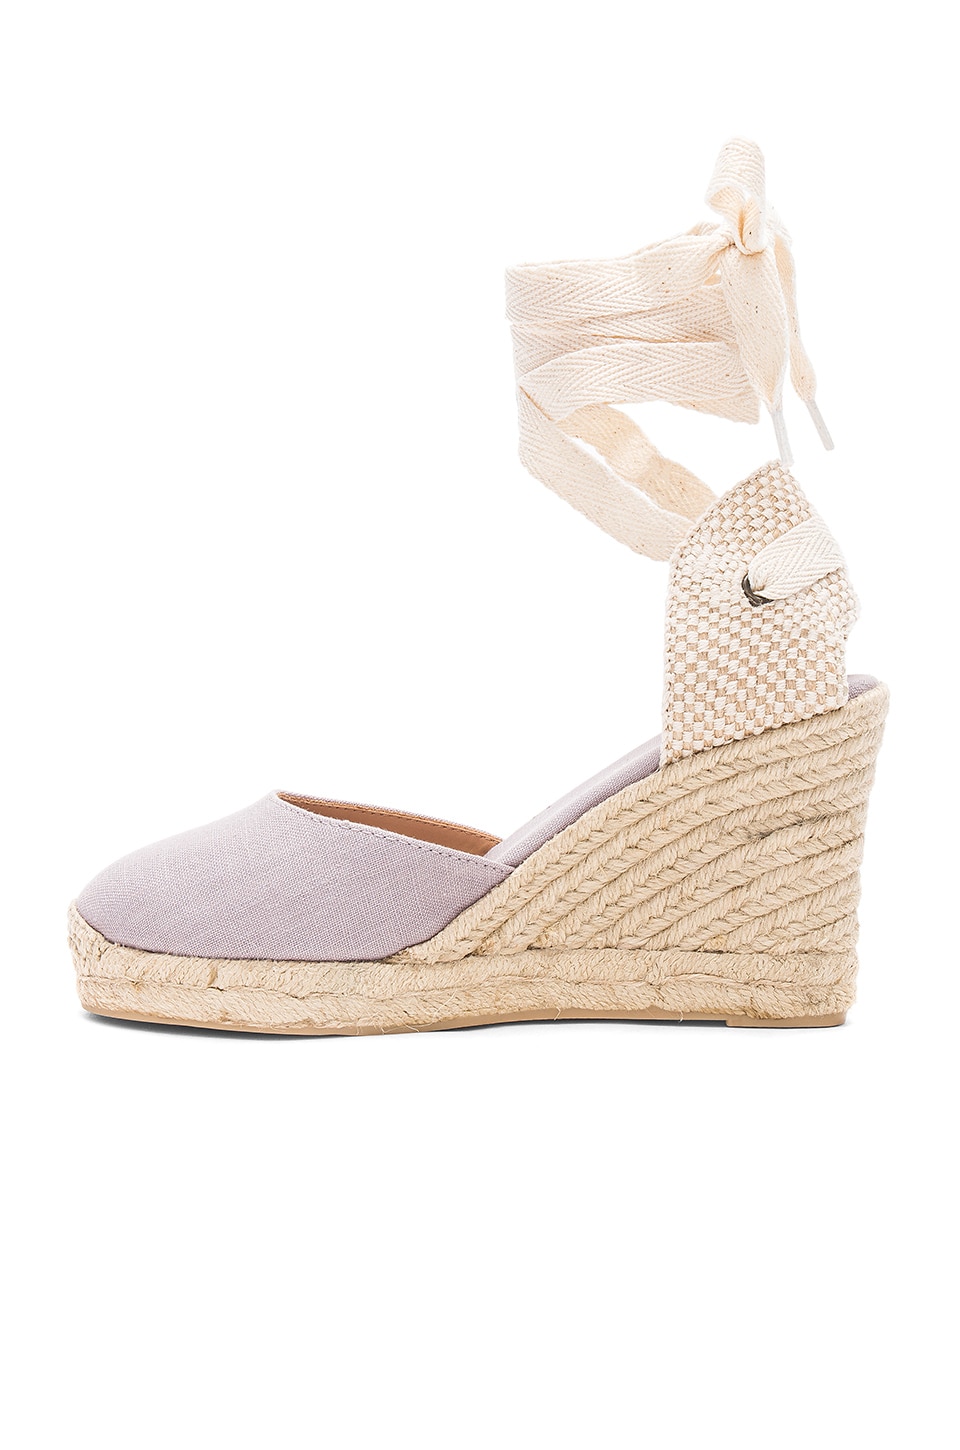 SOLUDOS Women'S Lace Up Espadrille Wedge Sandals in Gray | ModeSens